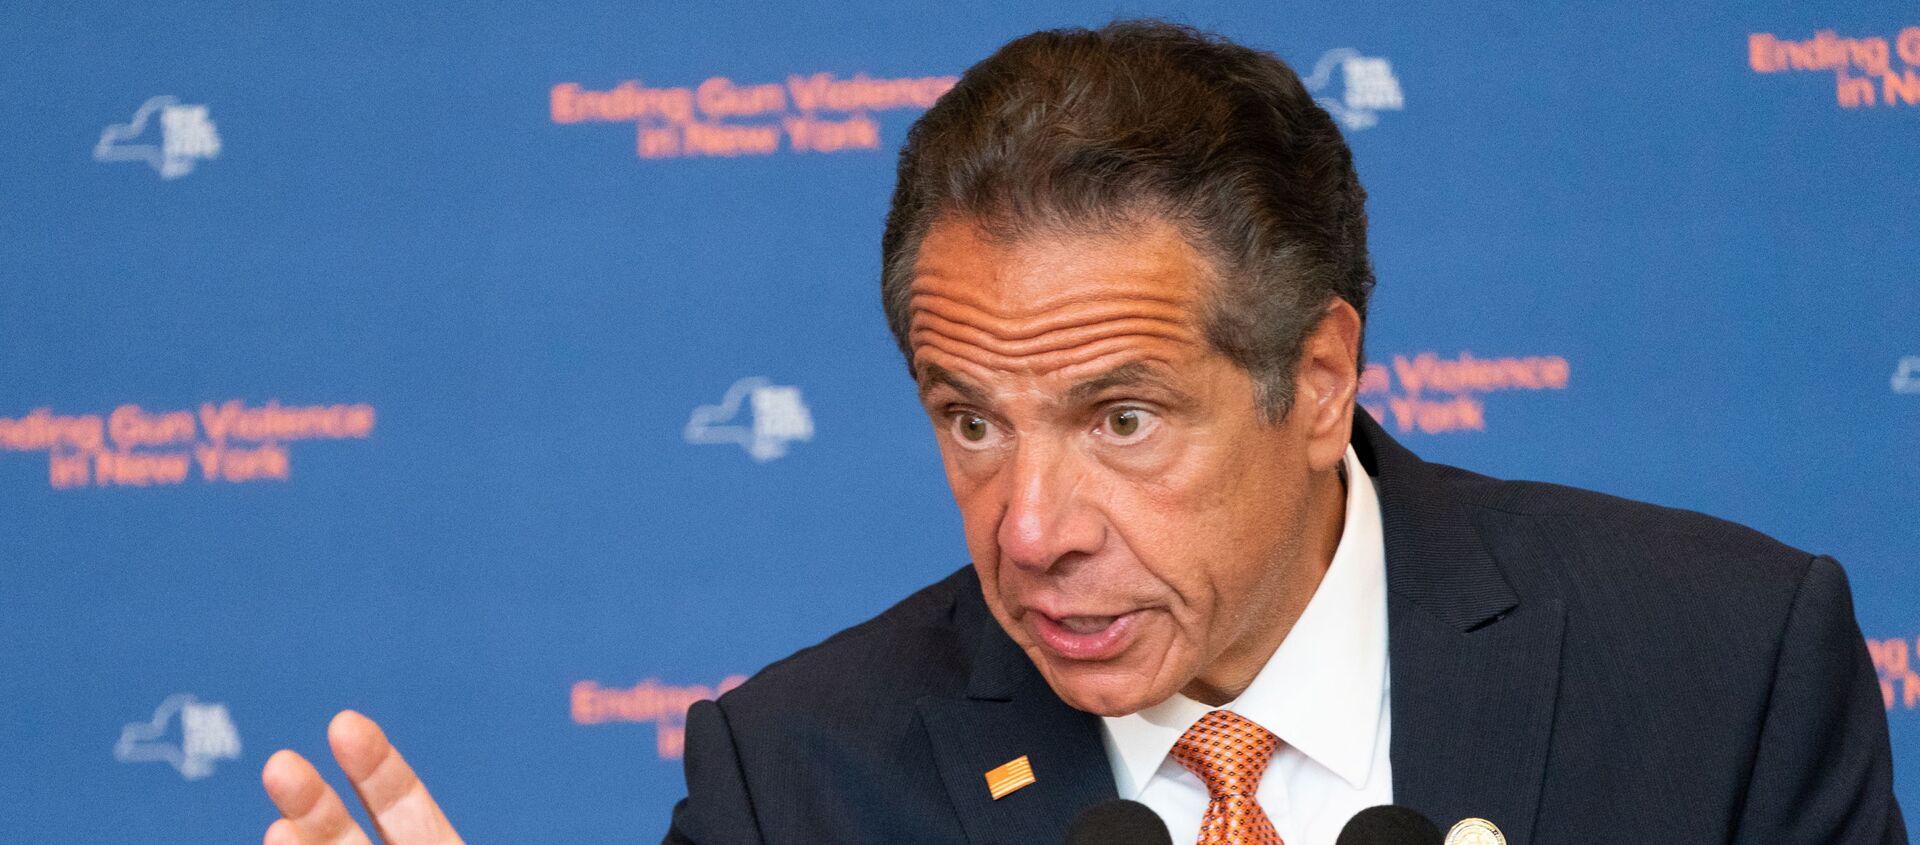 New York Governor Andrew Cuomo speaks during a news conference, to make an announcement that Gun Manufacturers are Liable for the harm their products cause, in New York City, New York, U.S., July 6, 2021 - Sputnik International, 1920, 03.08.2021